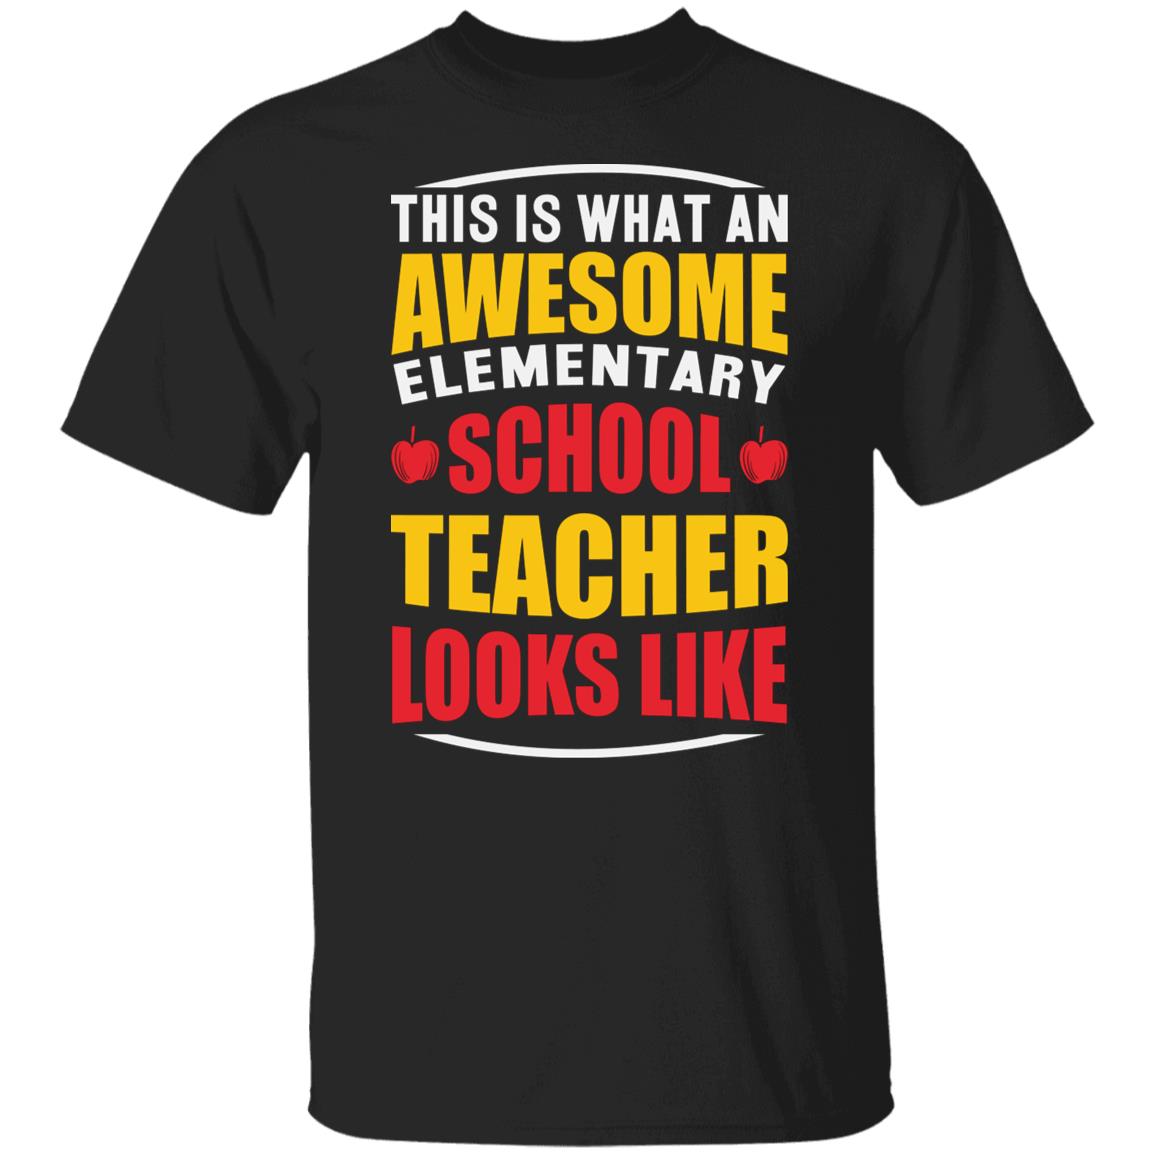 This is What An Awesome Elementary School Teacher Looks Like Shirt